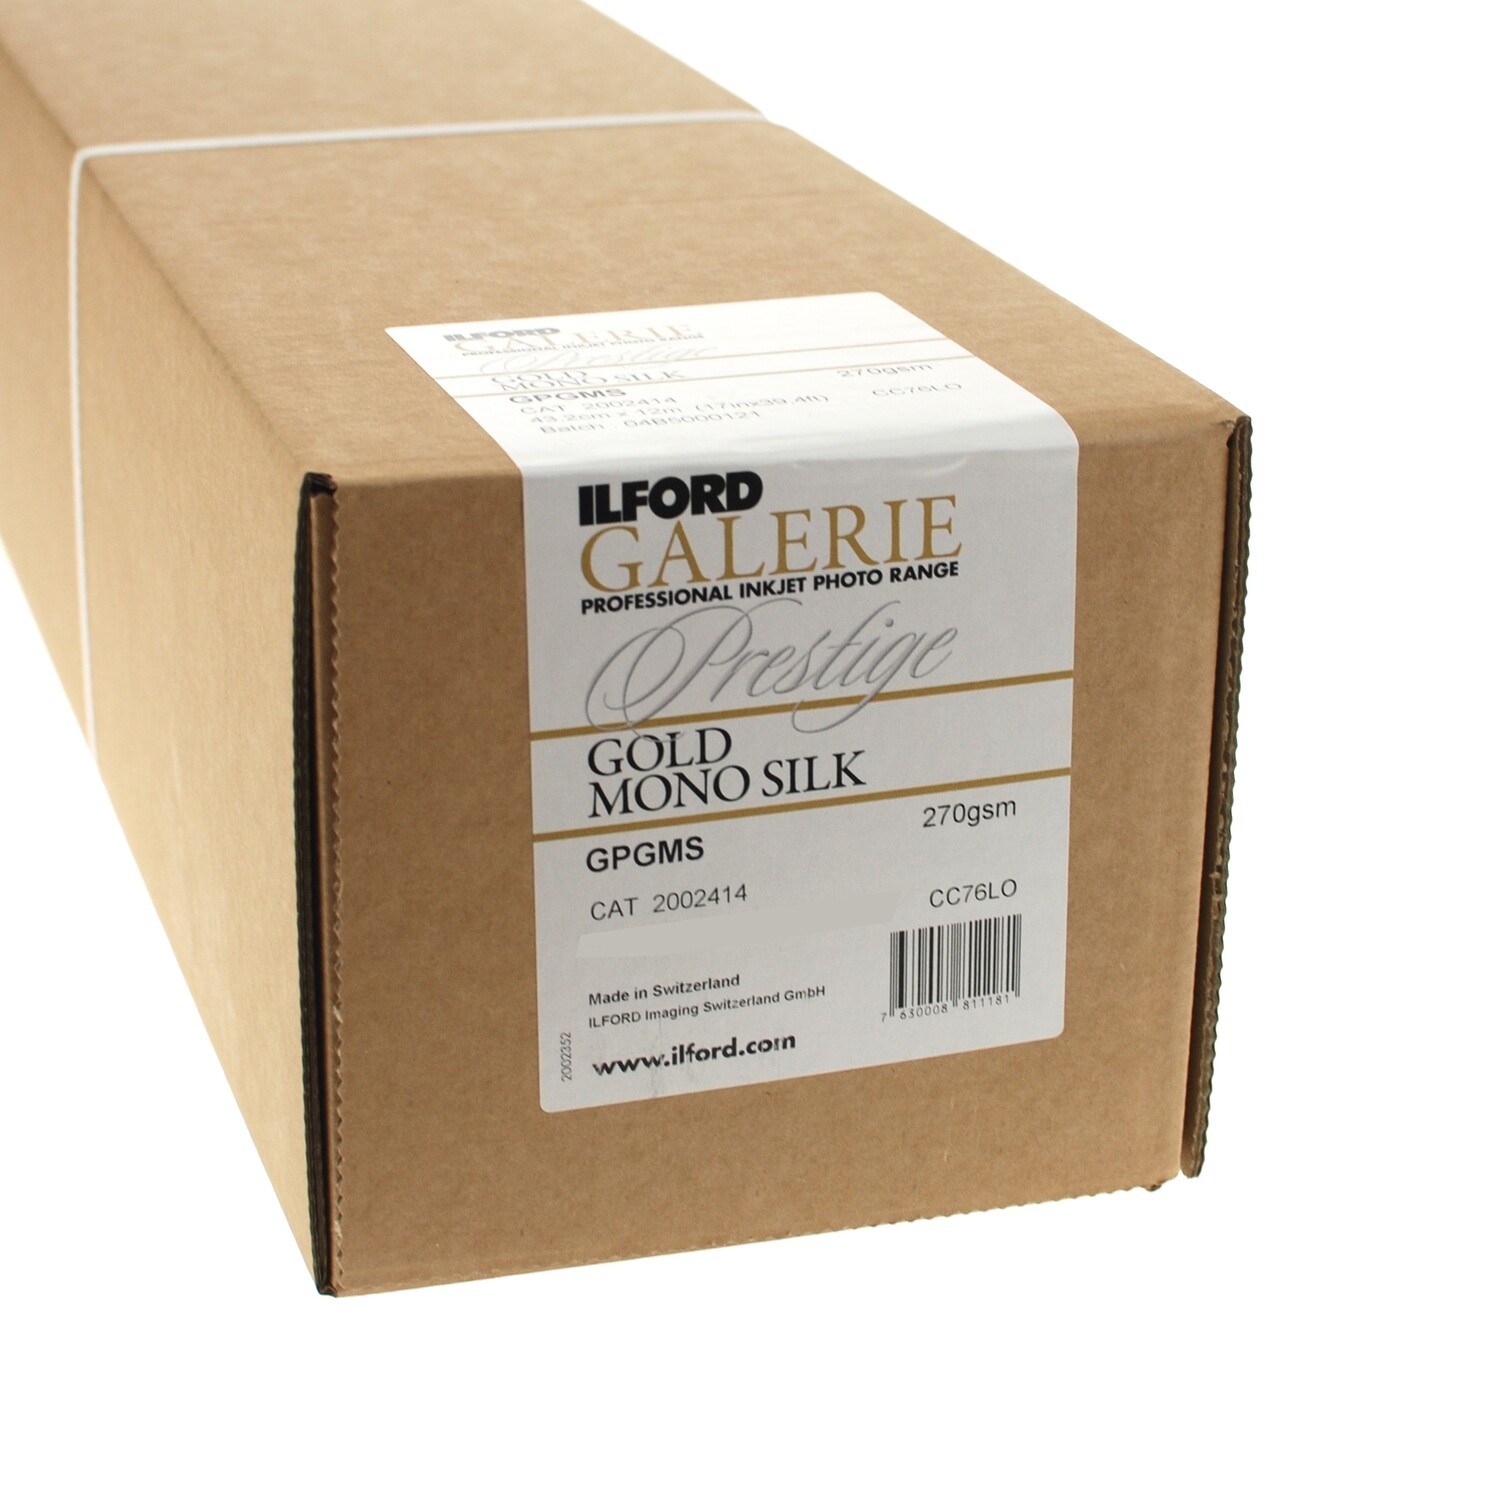 ILFORD GALERIE GOLD MONO SILK (270g) Rolle - Rolle 127x1200 CM (50Inchx39,4ft)